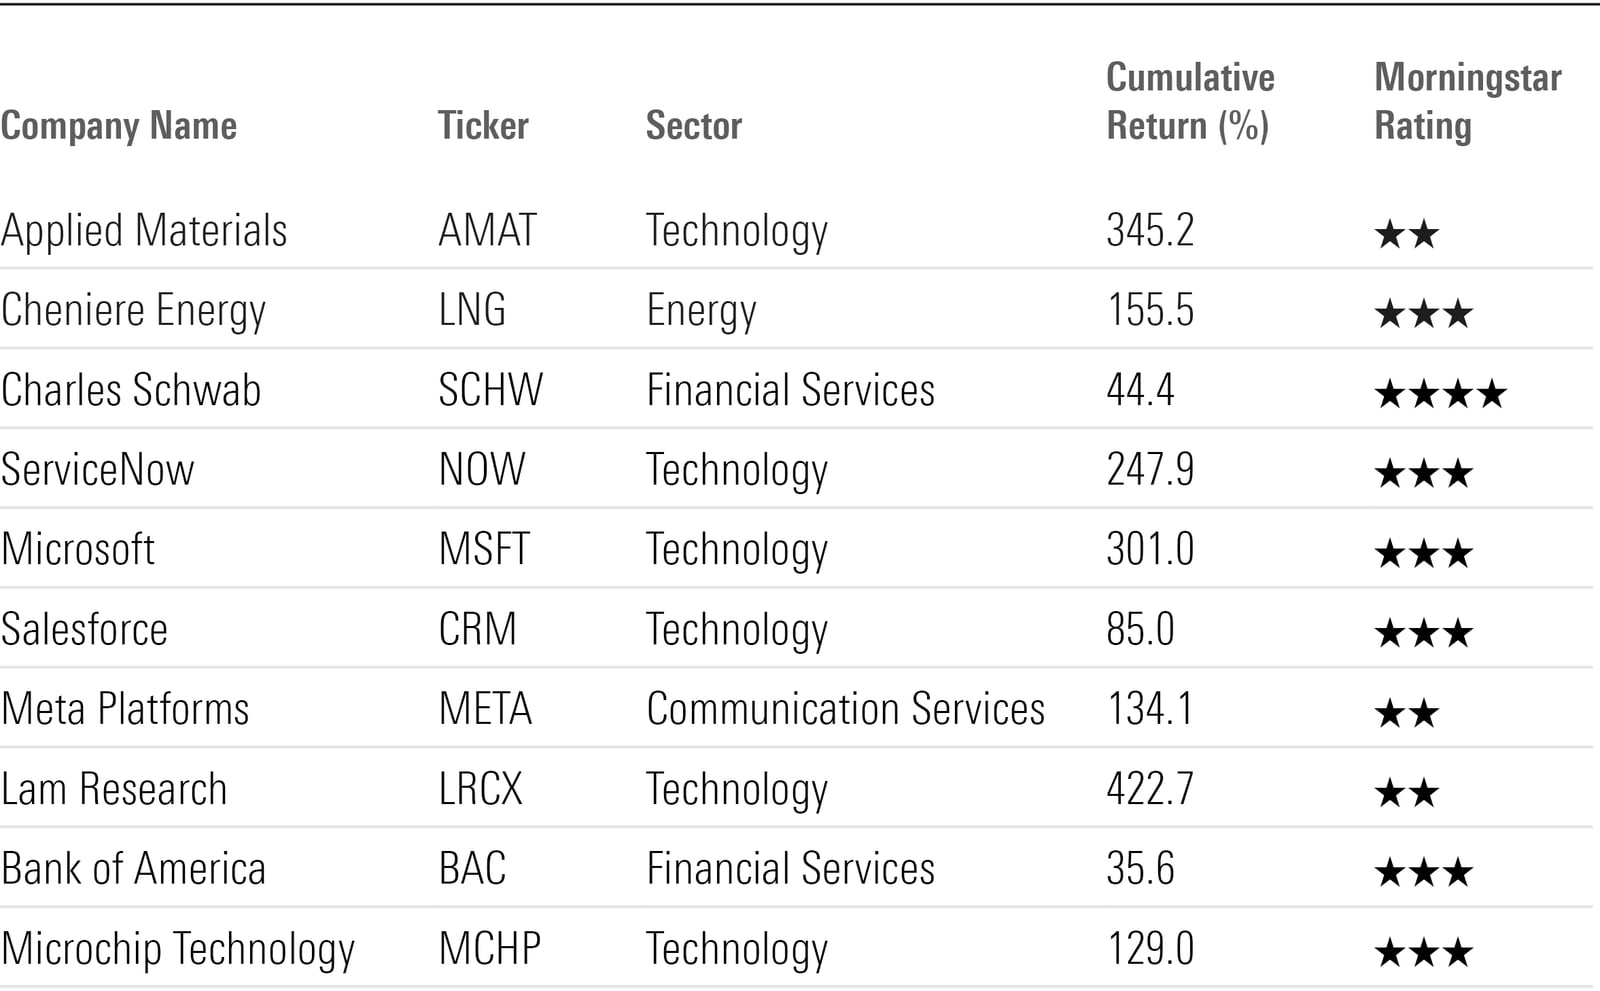 Table showing top 10 contributors to the Morningstar Wide Moat Focus Index over the past five years.